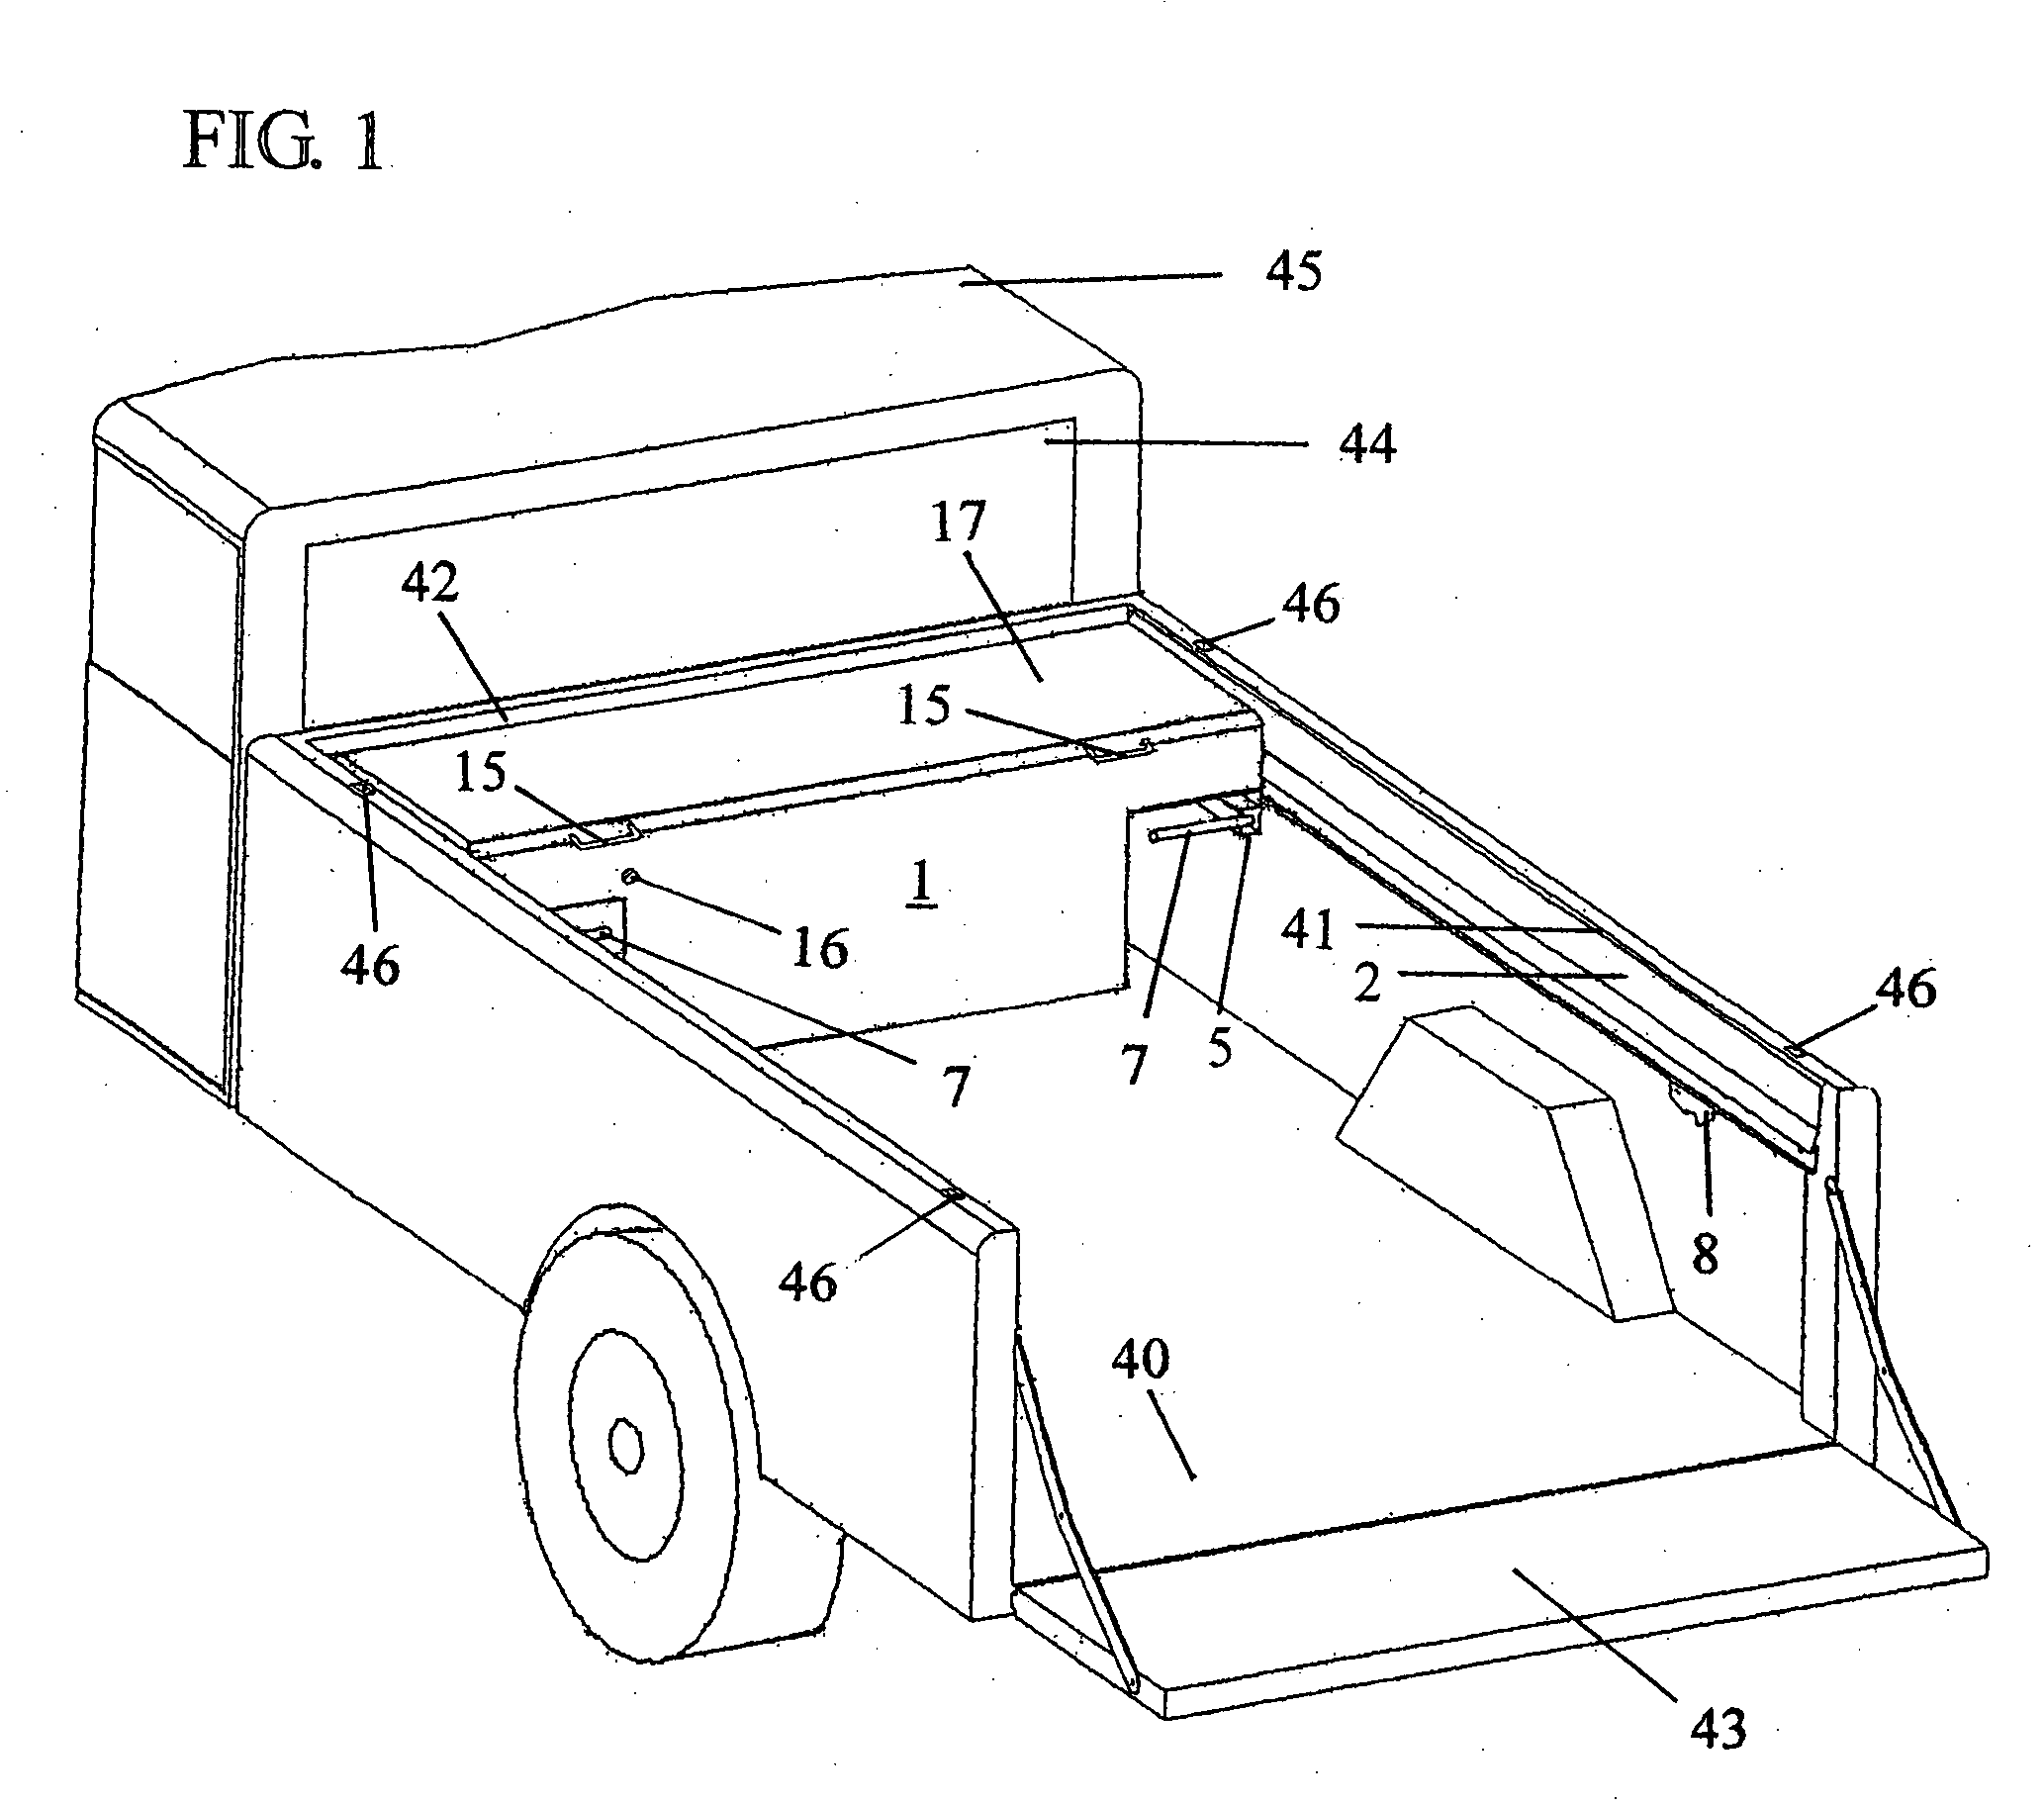 Toolbox conveyance system for a pickup truck